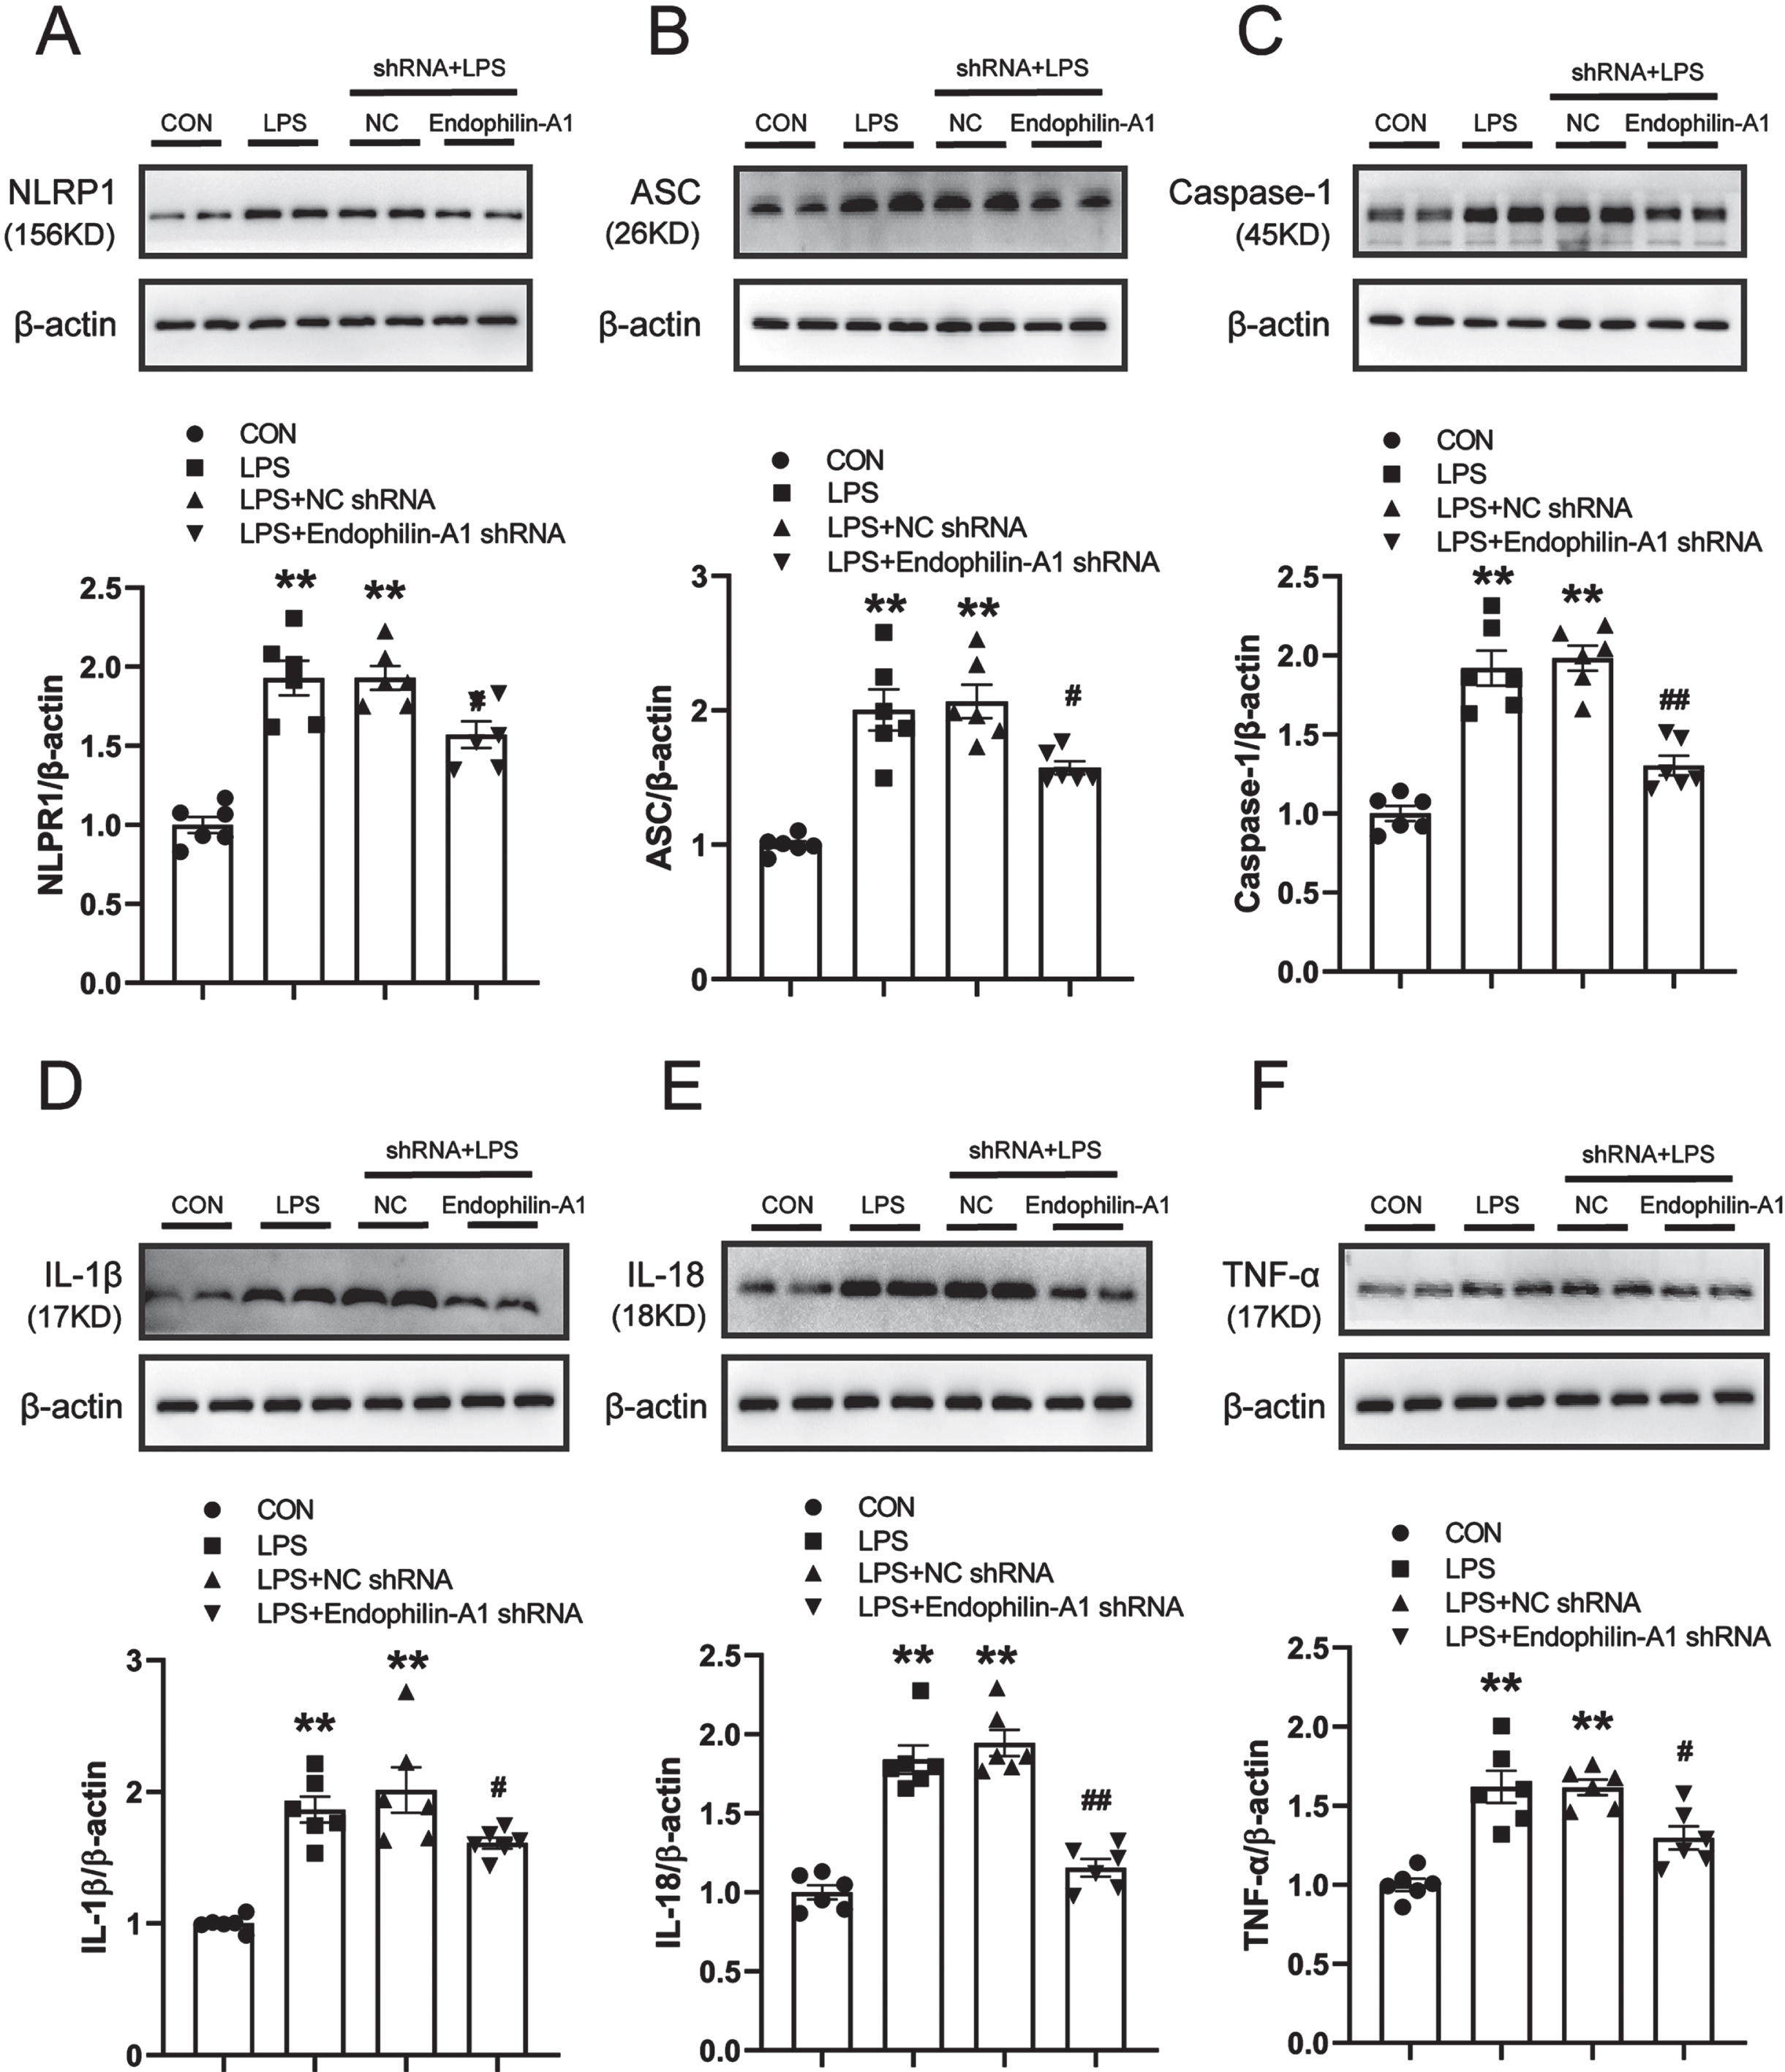 EPA1 knockdown alleviates NLRP1 inflammasome activation and related inflammatory responses in the SN of LPS-induced PD model mice. A–F) Western blot for NLRP1, Caspase-1, ASC, IL-1β, IL-18, and TNF-α protein level. Data are expressed as mean±SEM (n = 6). **p < 0.01 vs. the control group, #p < 0.05, # #p < 0.01 vs. the LPS+NC shRNA group.